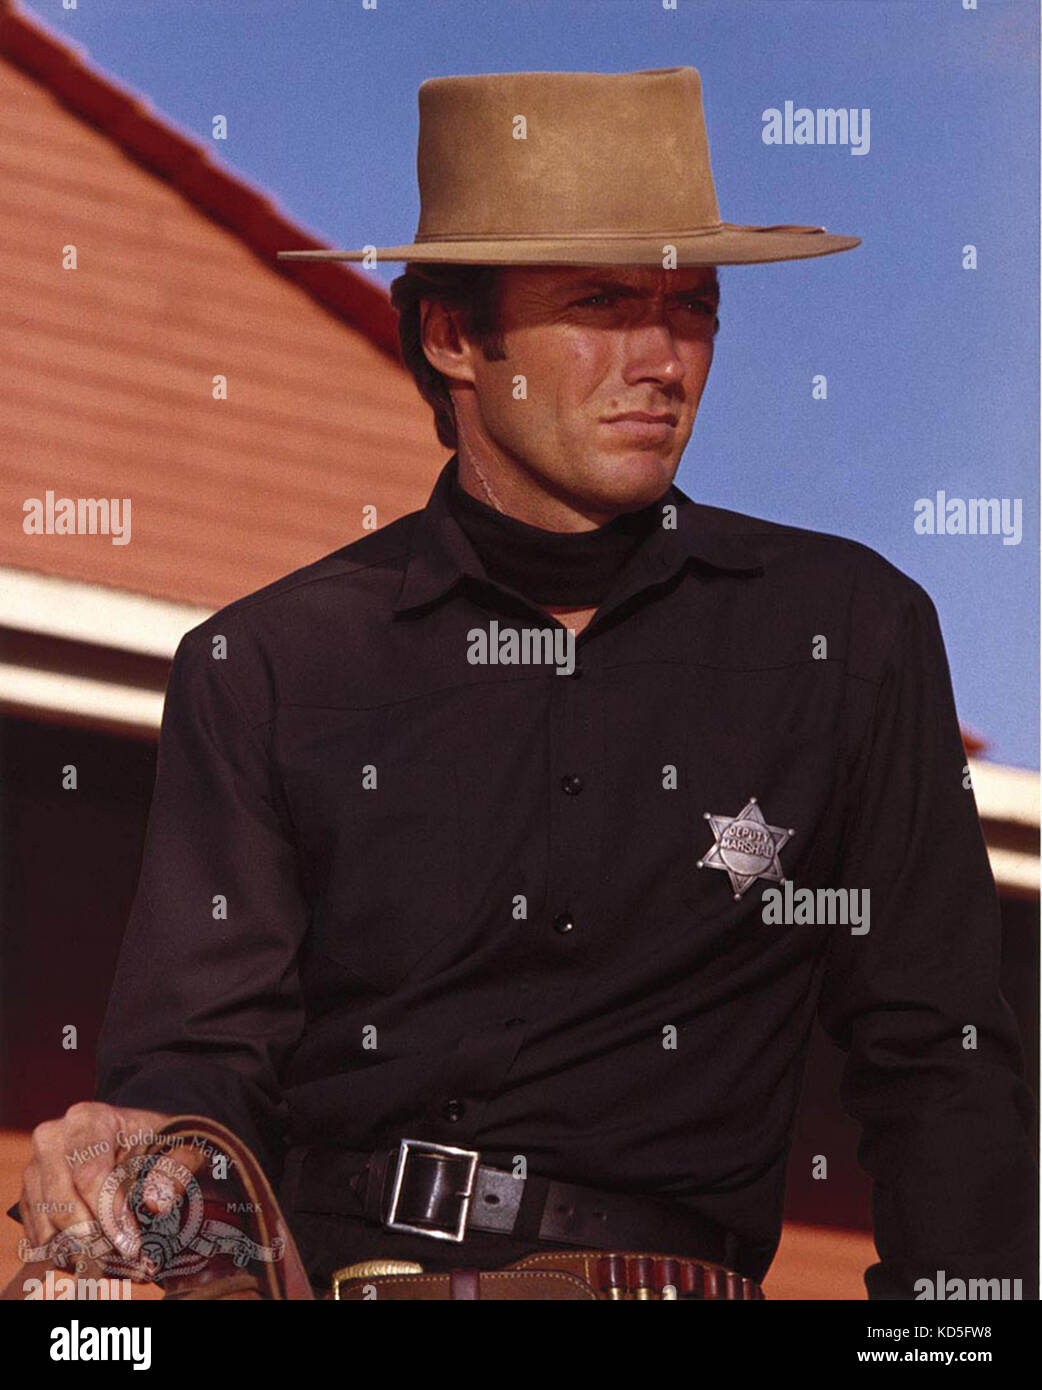 HANG 'EM HIGH (1968) CLINT EASTWOOD TED POST (DIR) MGM/MOVIESTORE COLLECTION LTD Banque D'Images